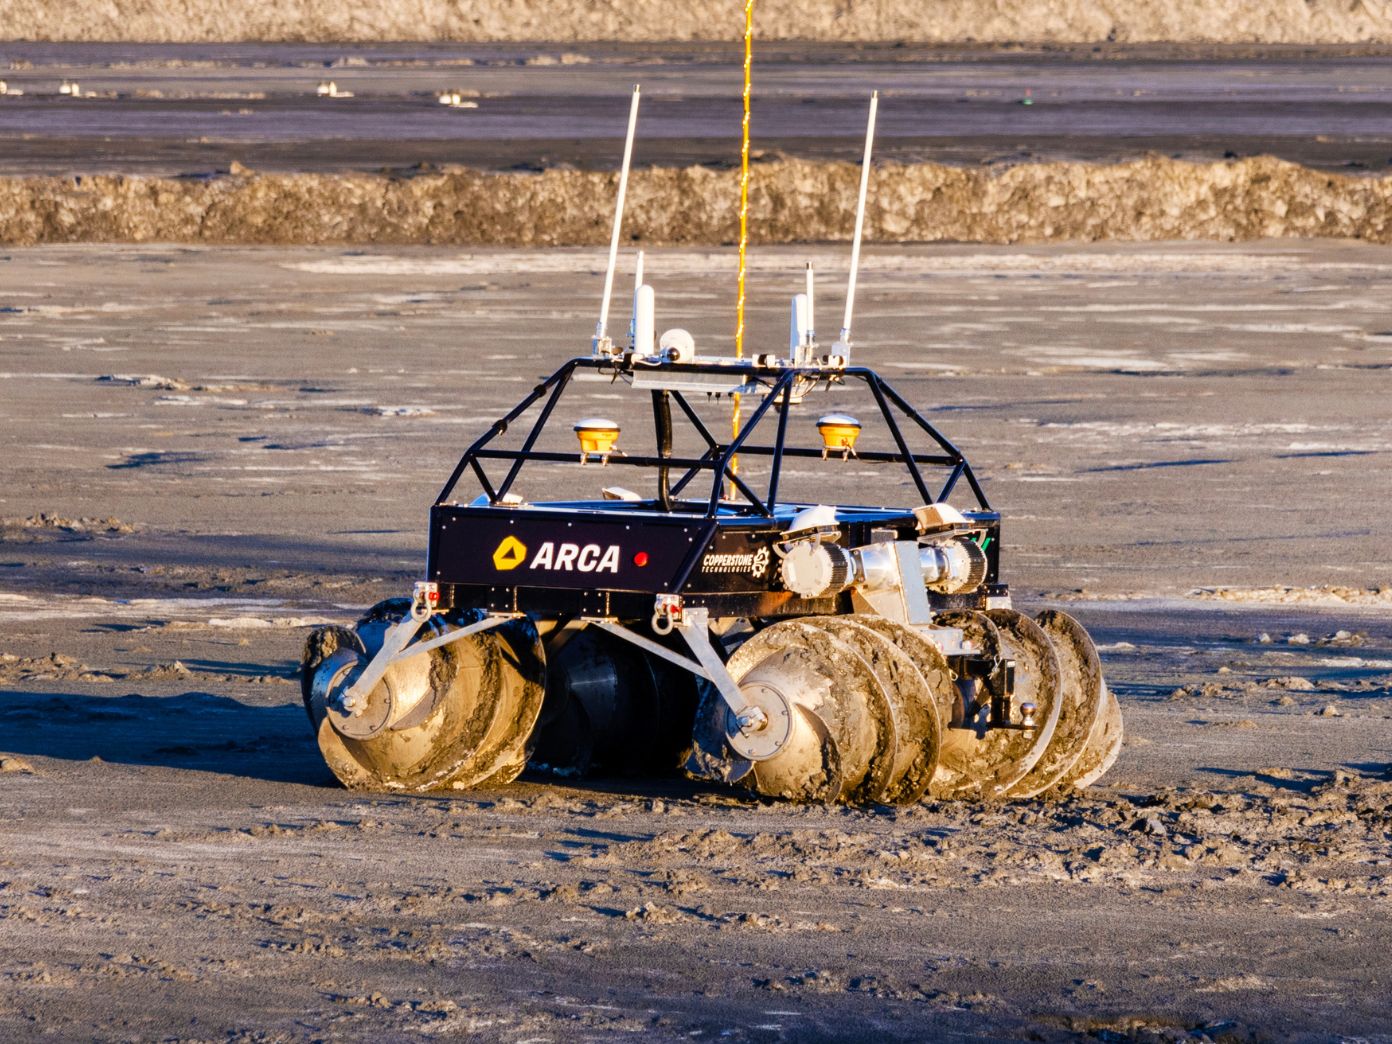 Rovers from Copperstone are customized with Arca's Smart Churning technologies